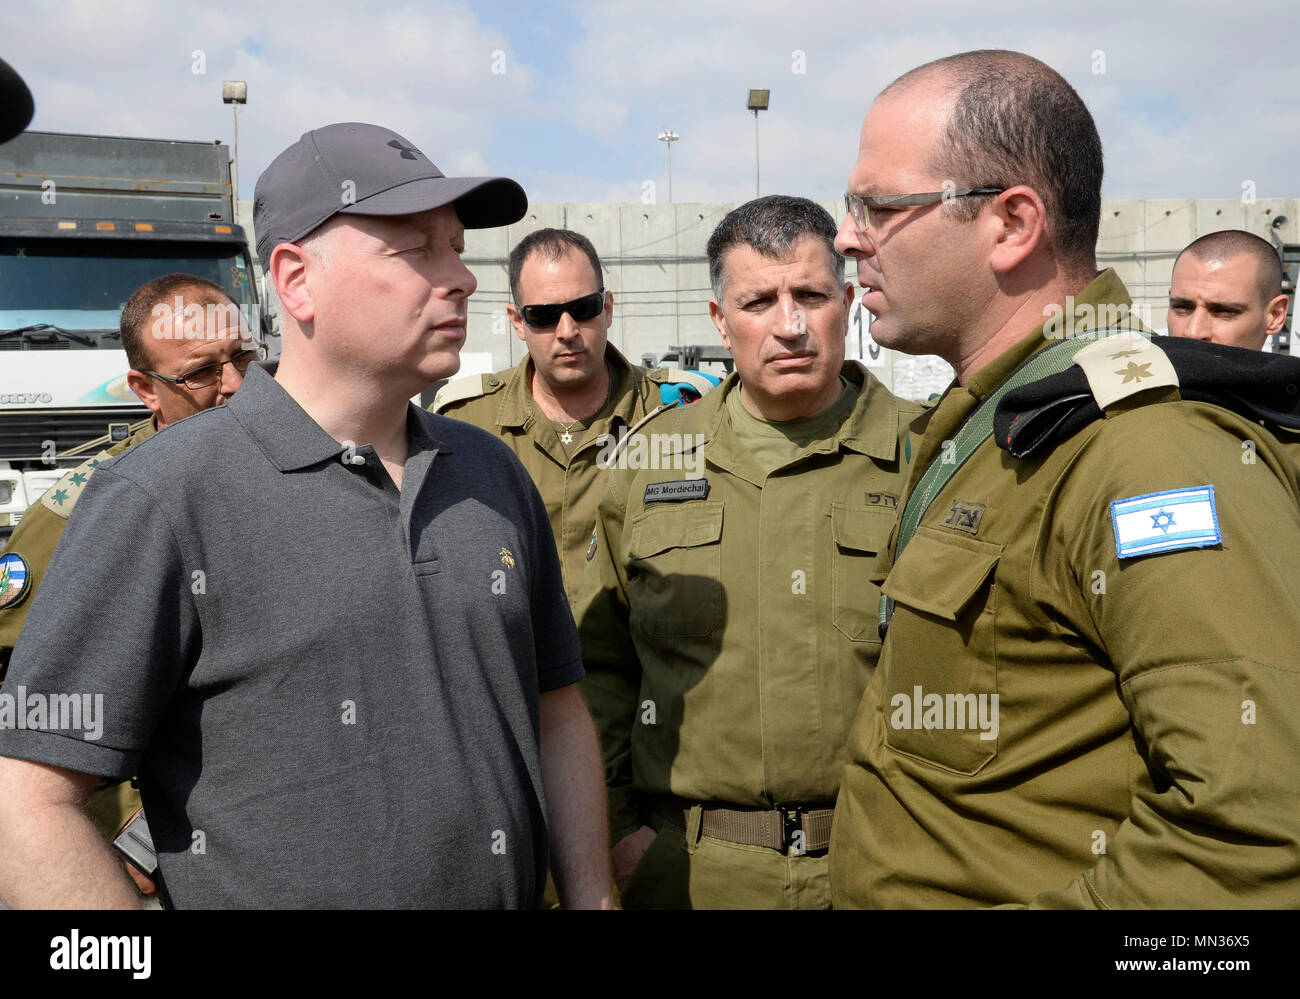 Special Representative for International Negotiations Jason Greenblatt spent a day touring the Gaza border.   He visited Kerem Shalom and Erez crossing points, and then was guided by COGAT Yoav 'Poli' Mordechai through the Hamas-created Chai Tunnel. Mr. Greenblatt also visited the nearby Iron Dome Battery, and met with residents of kibbutz Nahal Oz, who expressed their encouragement and hope for the success of the Trump Administration's effort to help broker a peace deal. Stock Photo